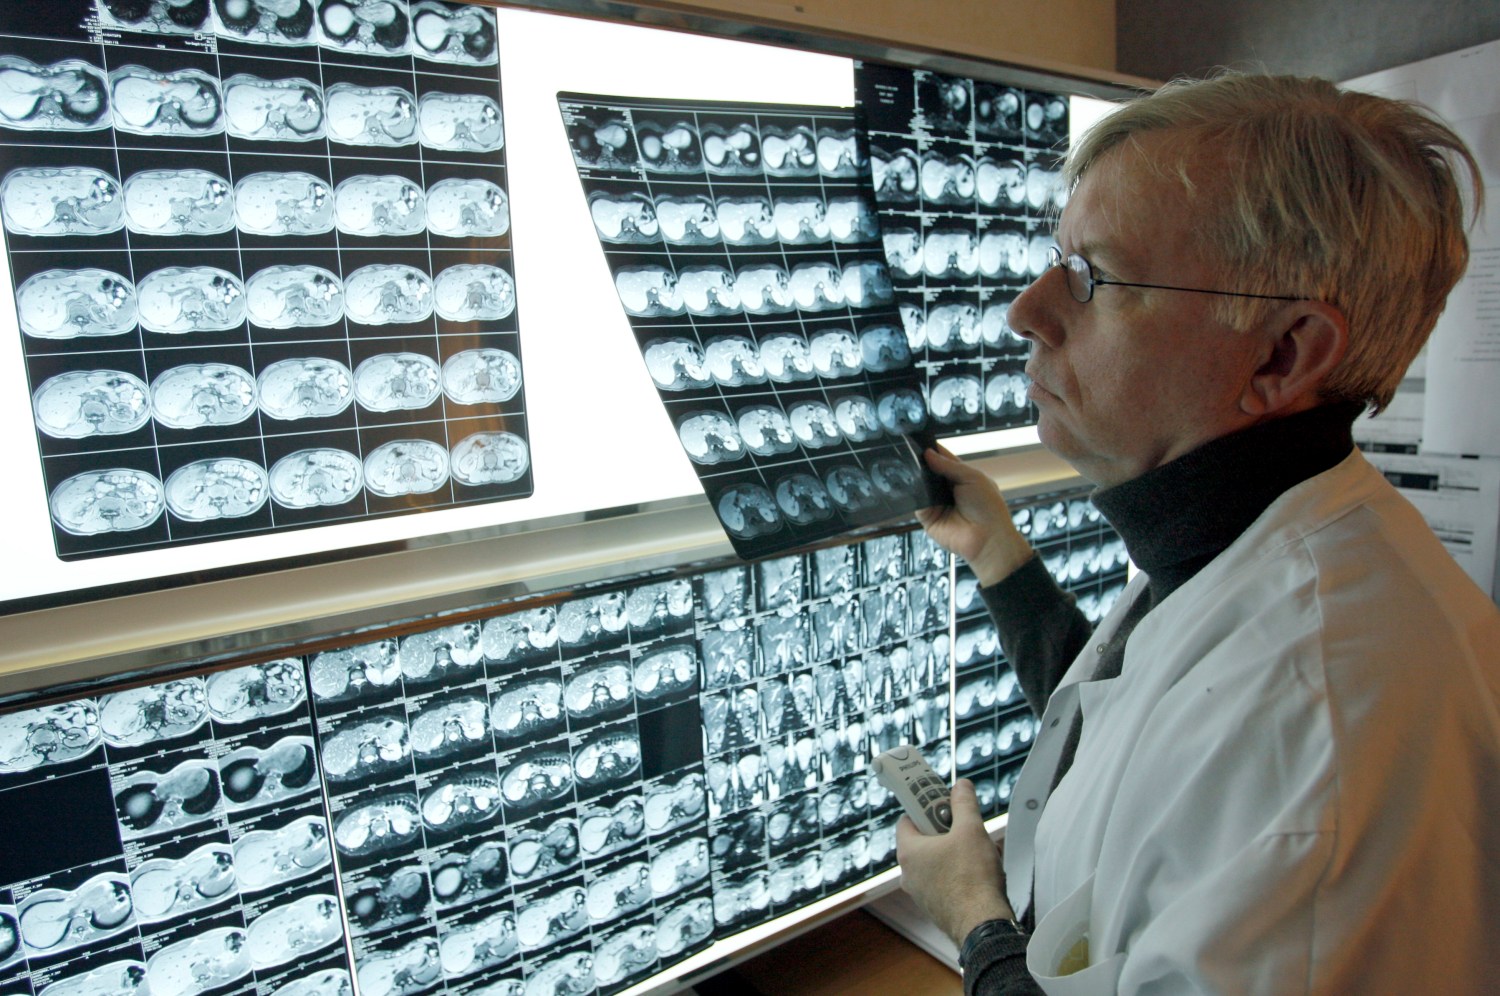 A radiologist examines X-rays of a patient at the Ambroise Pare hospital in Marseille, southern France, April 8, 2008.   REUTERS/Jean-Paul Pelissier (FRANCE) - PM1E4480UAL01